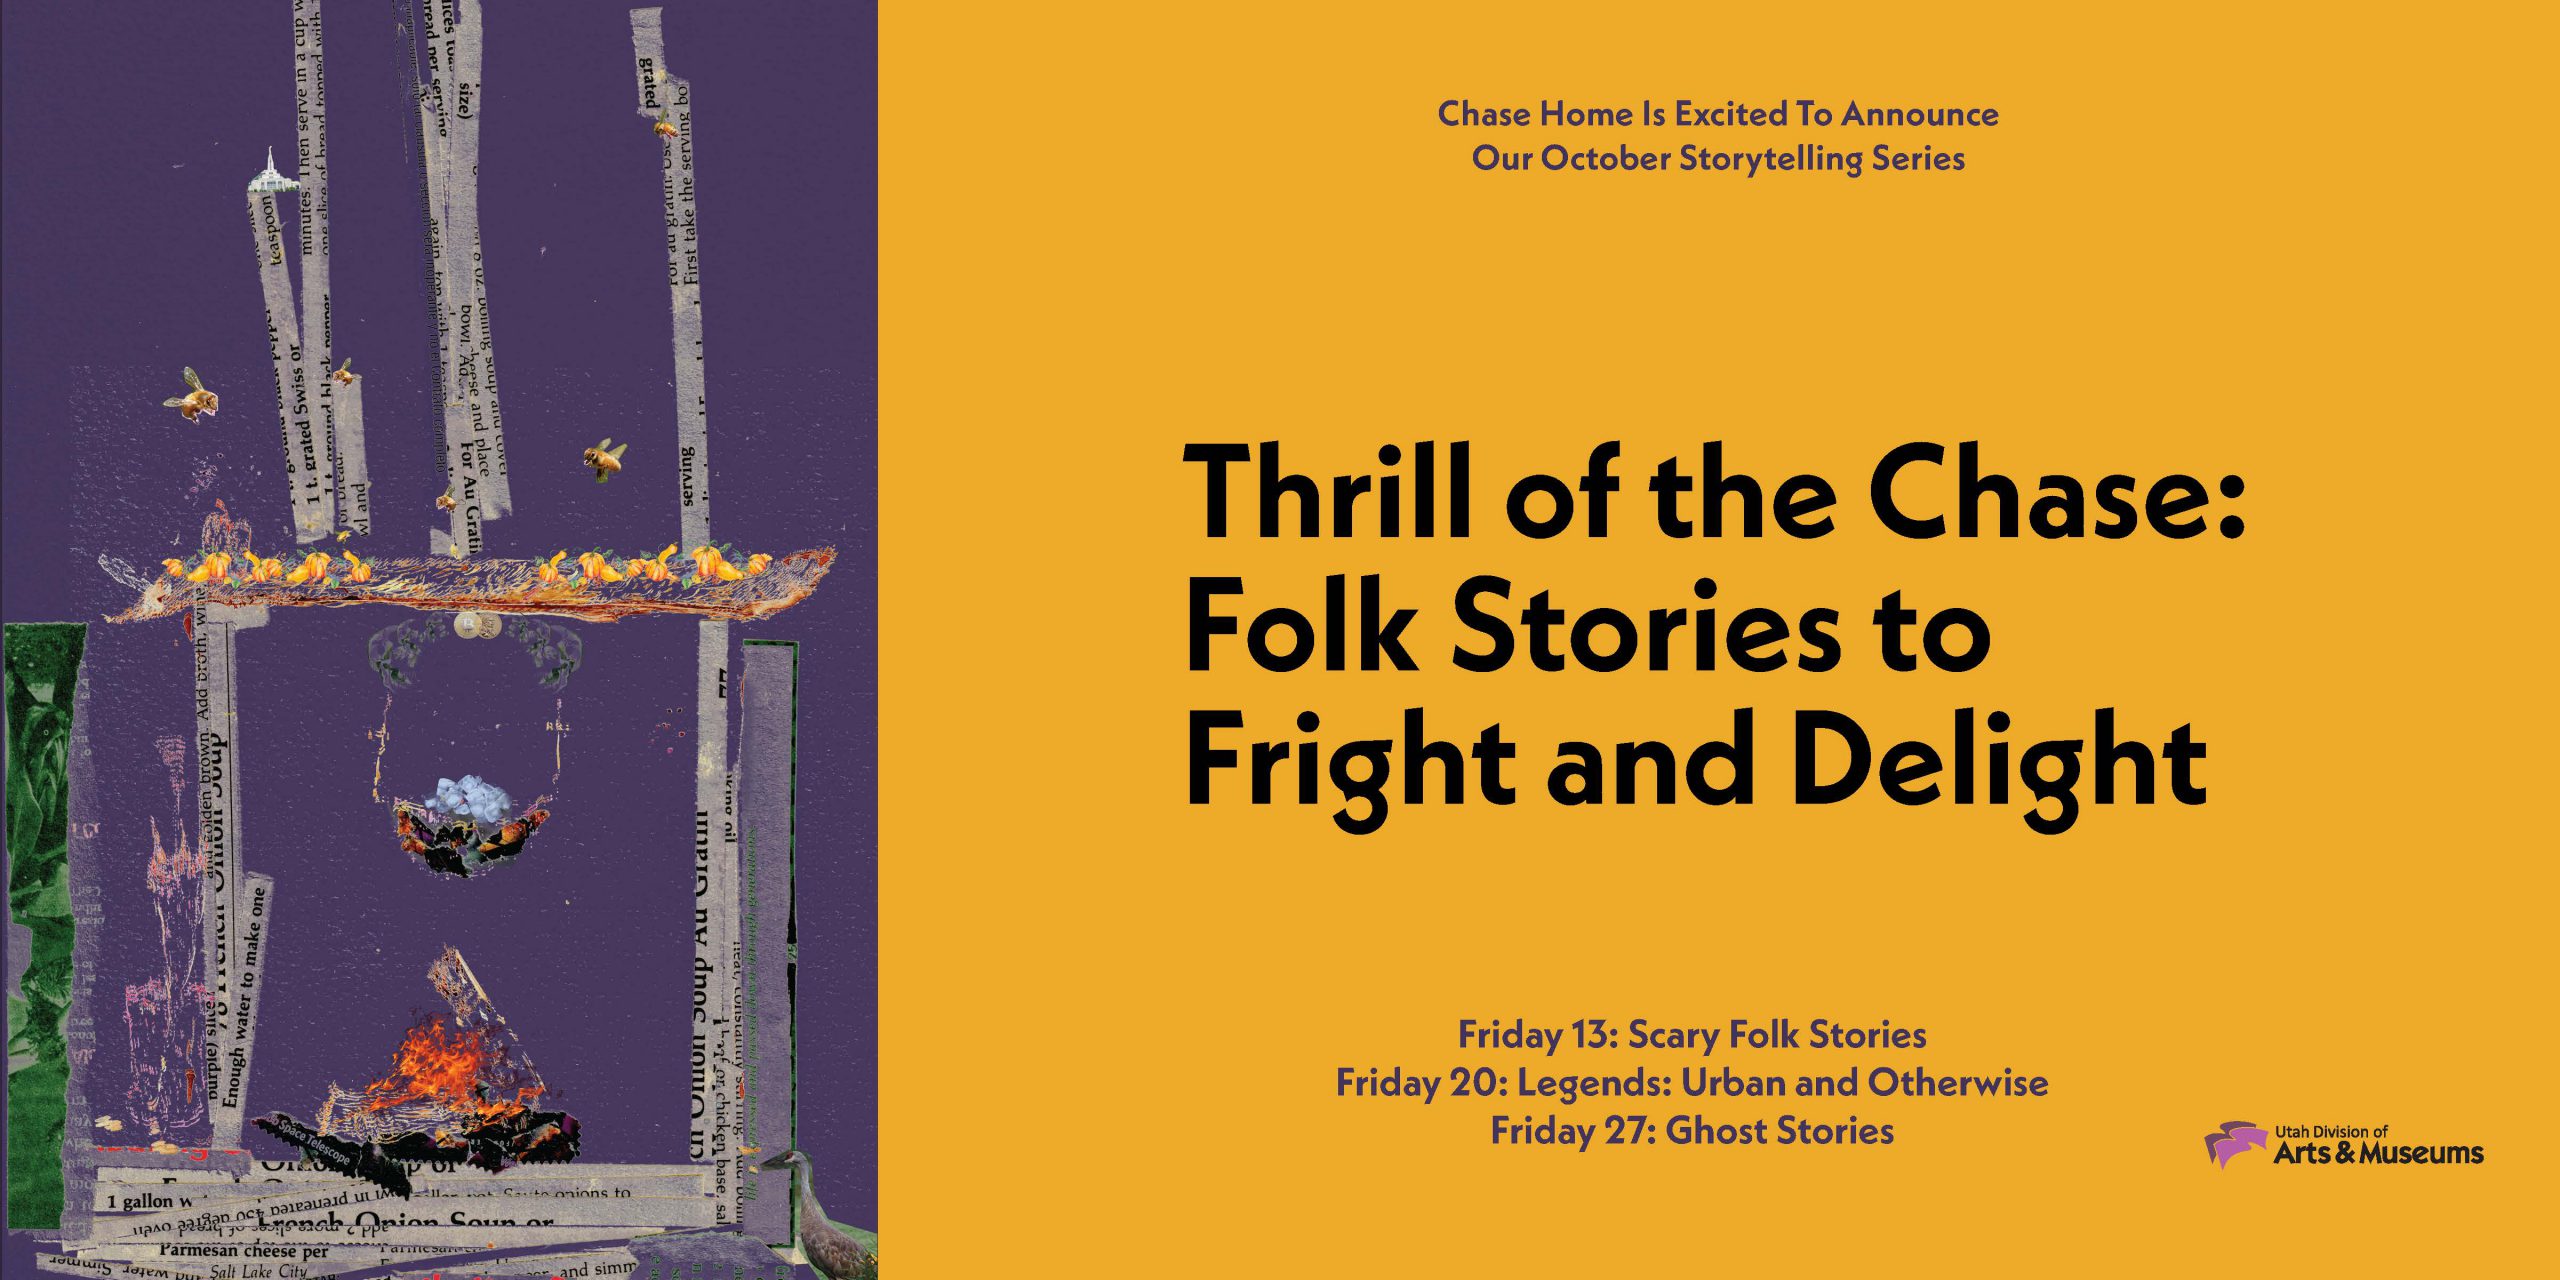 Chase Home is excited to announce our October storytelling series: Thrill of the Chase, Folk Stories to Fright and Delight.